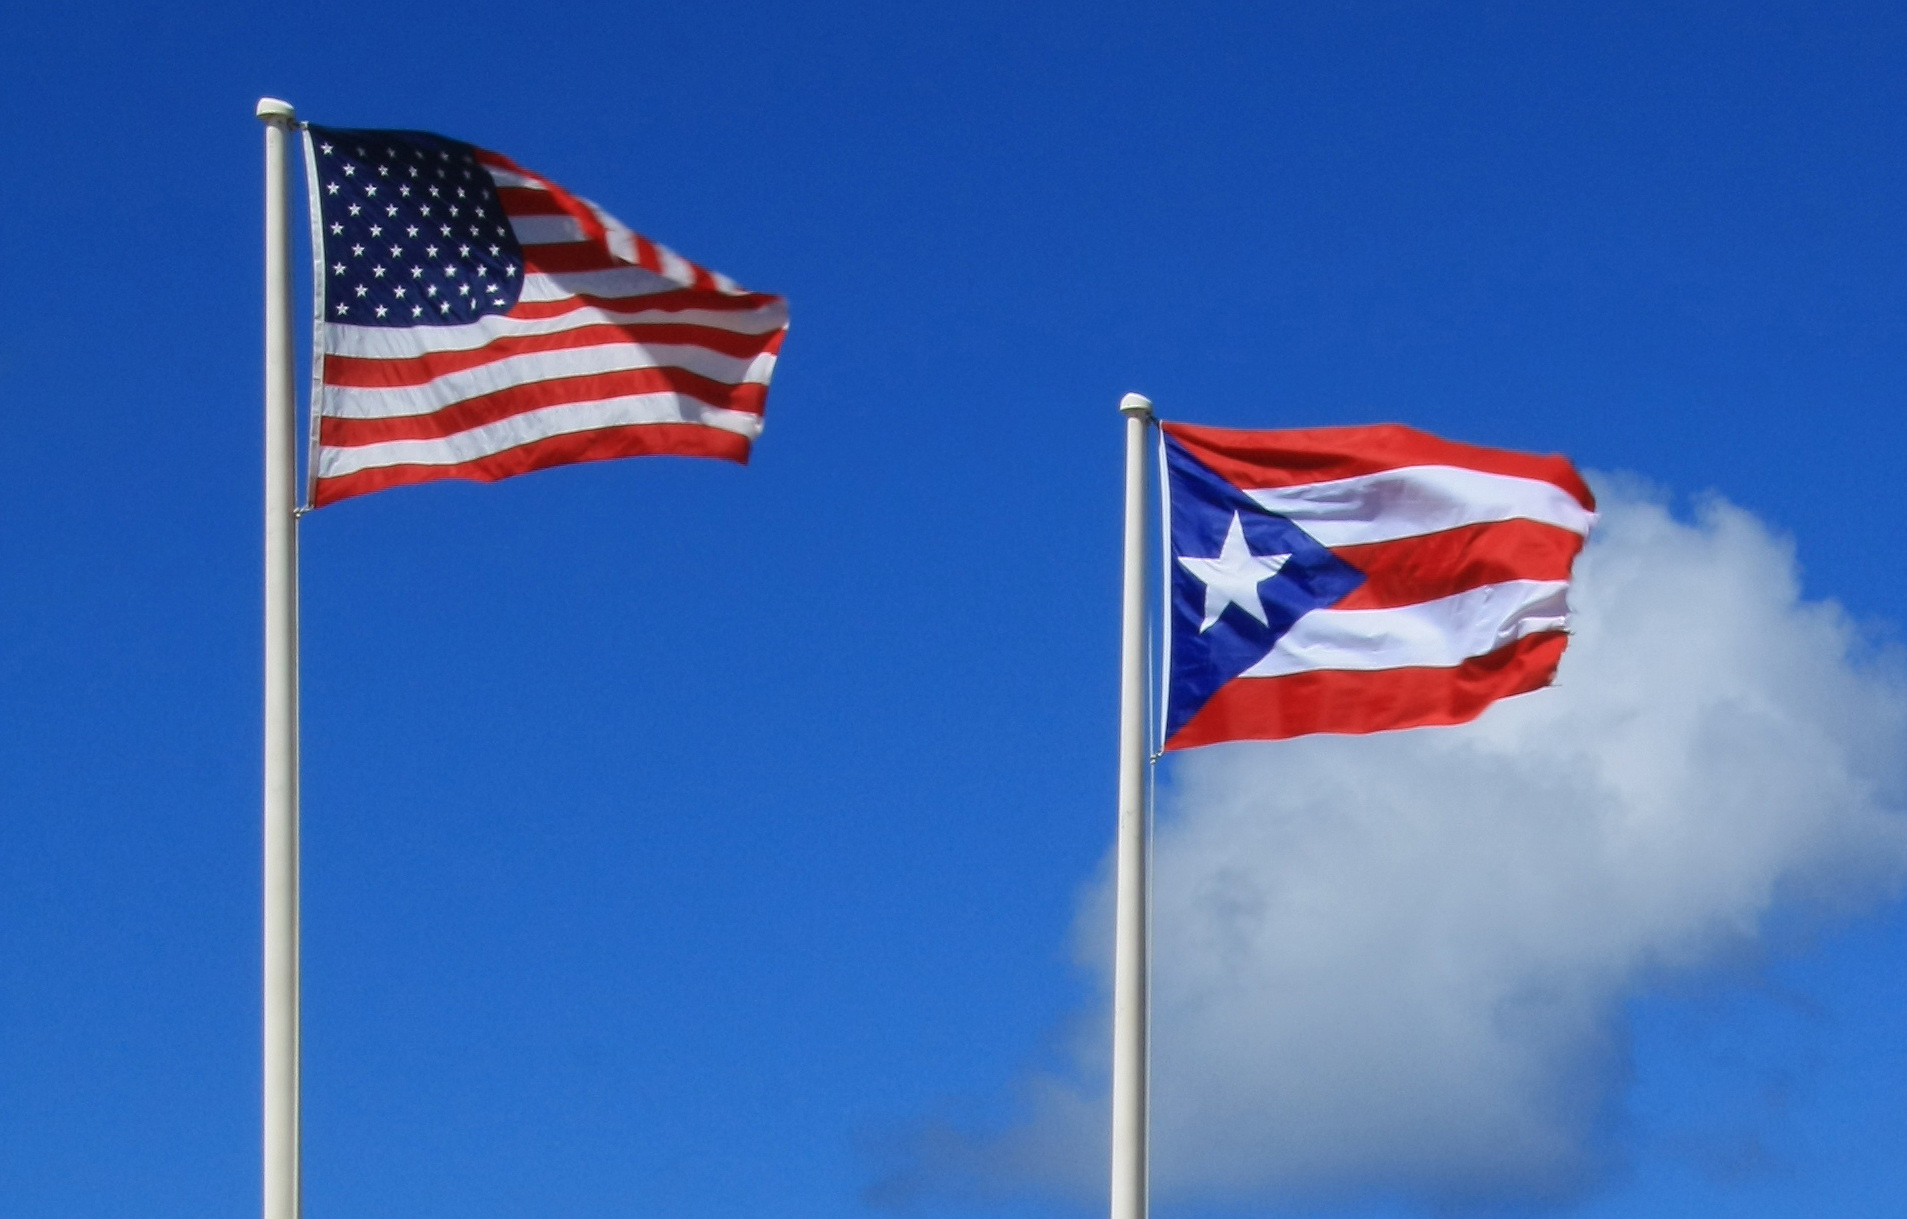 In equal-protection challenge, court will review Puerto Rico's